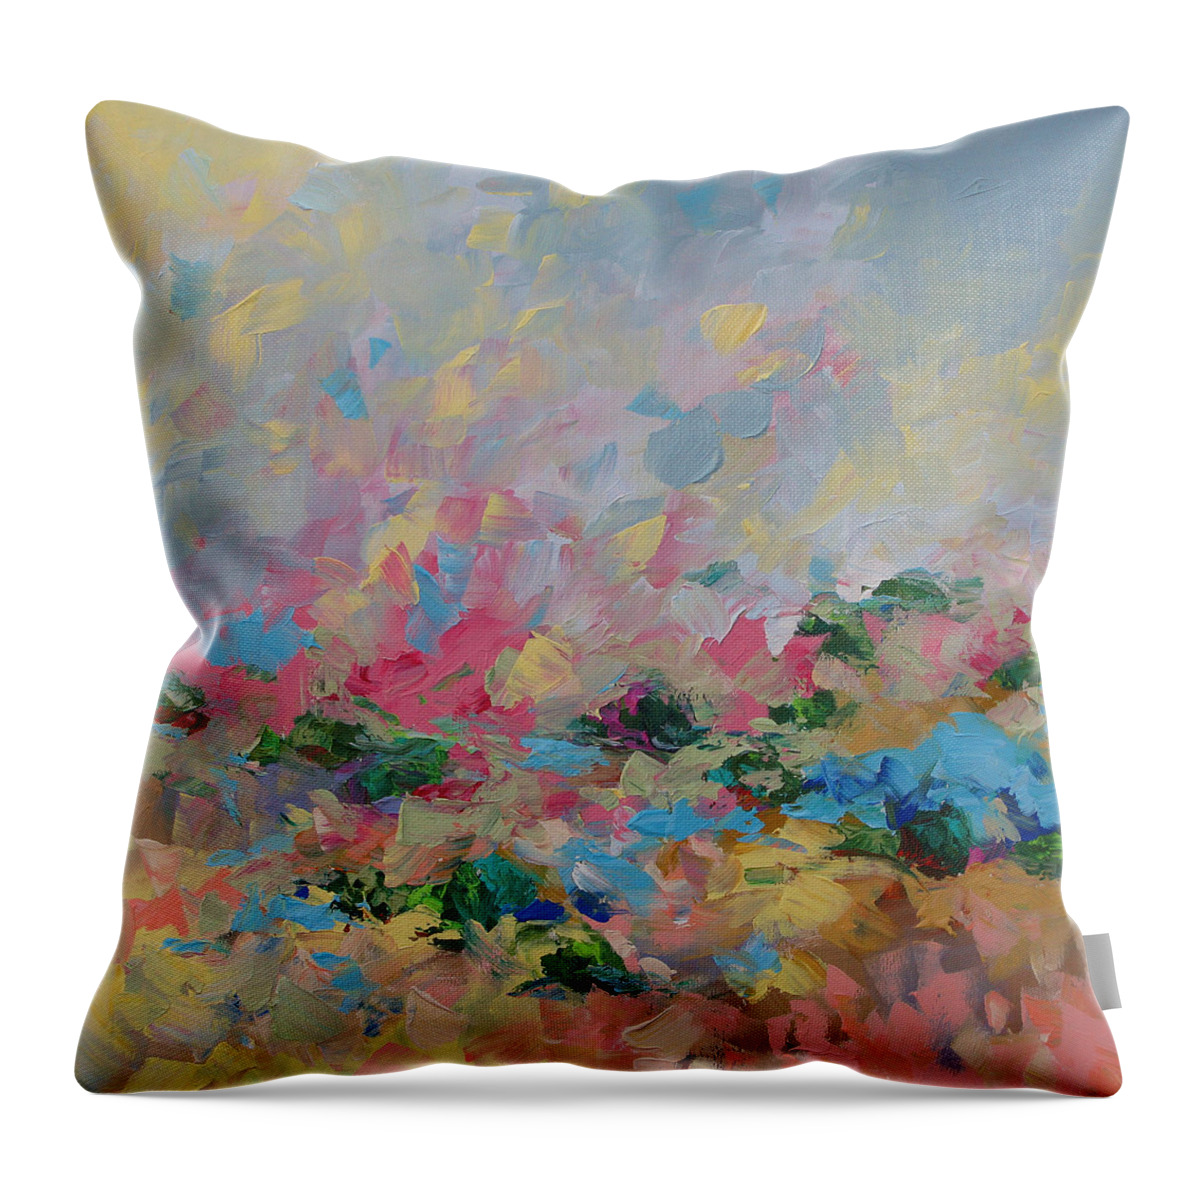 Art Throw Pillow featuring the painting Joyful Day by Linda Monfort